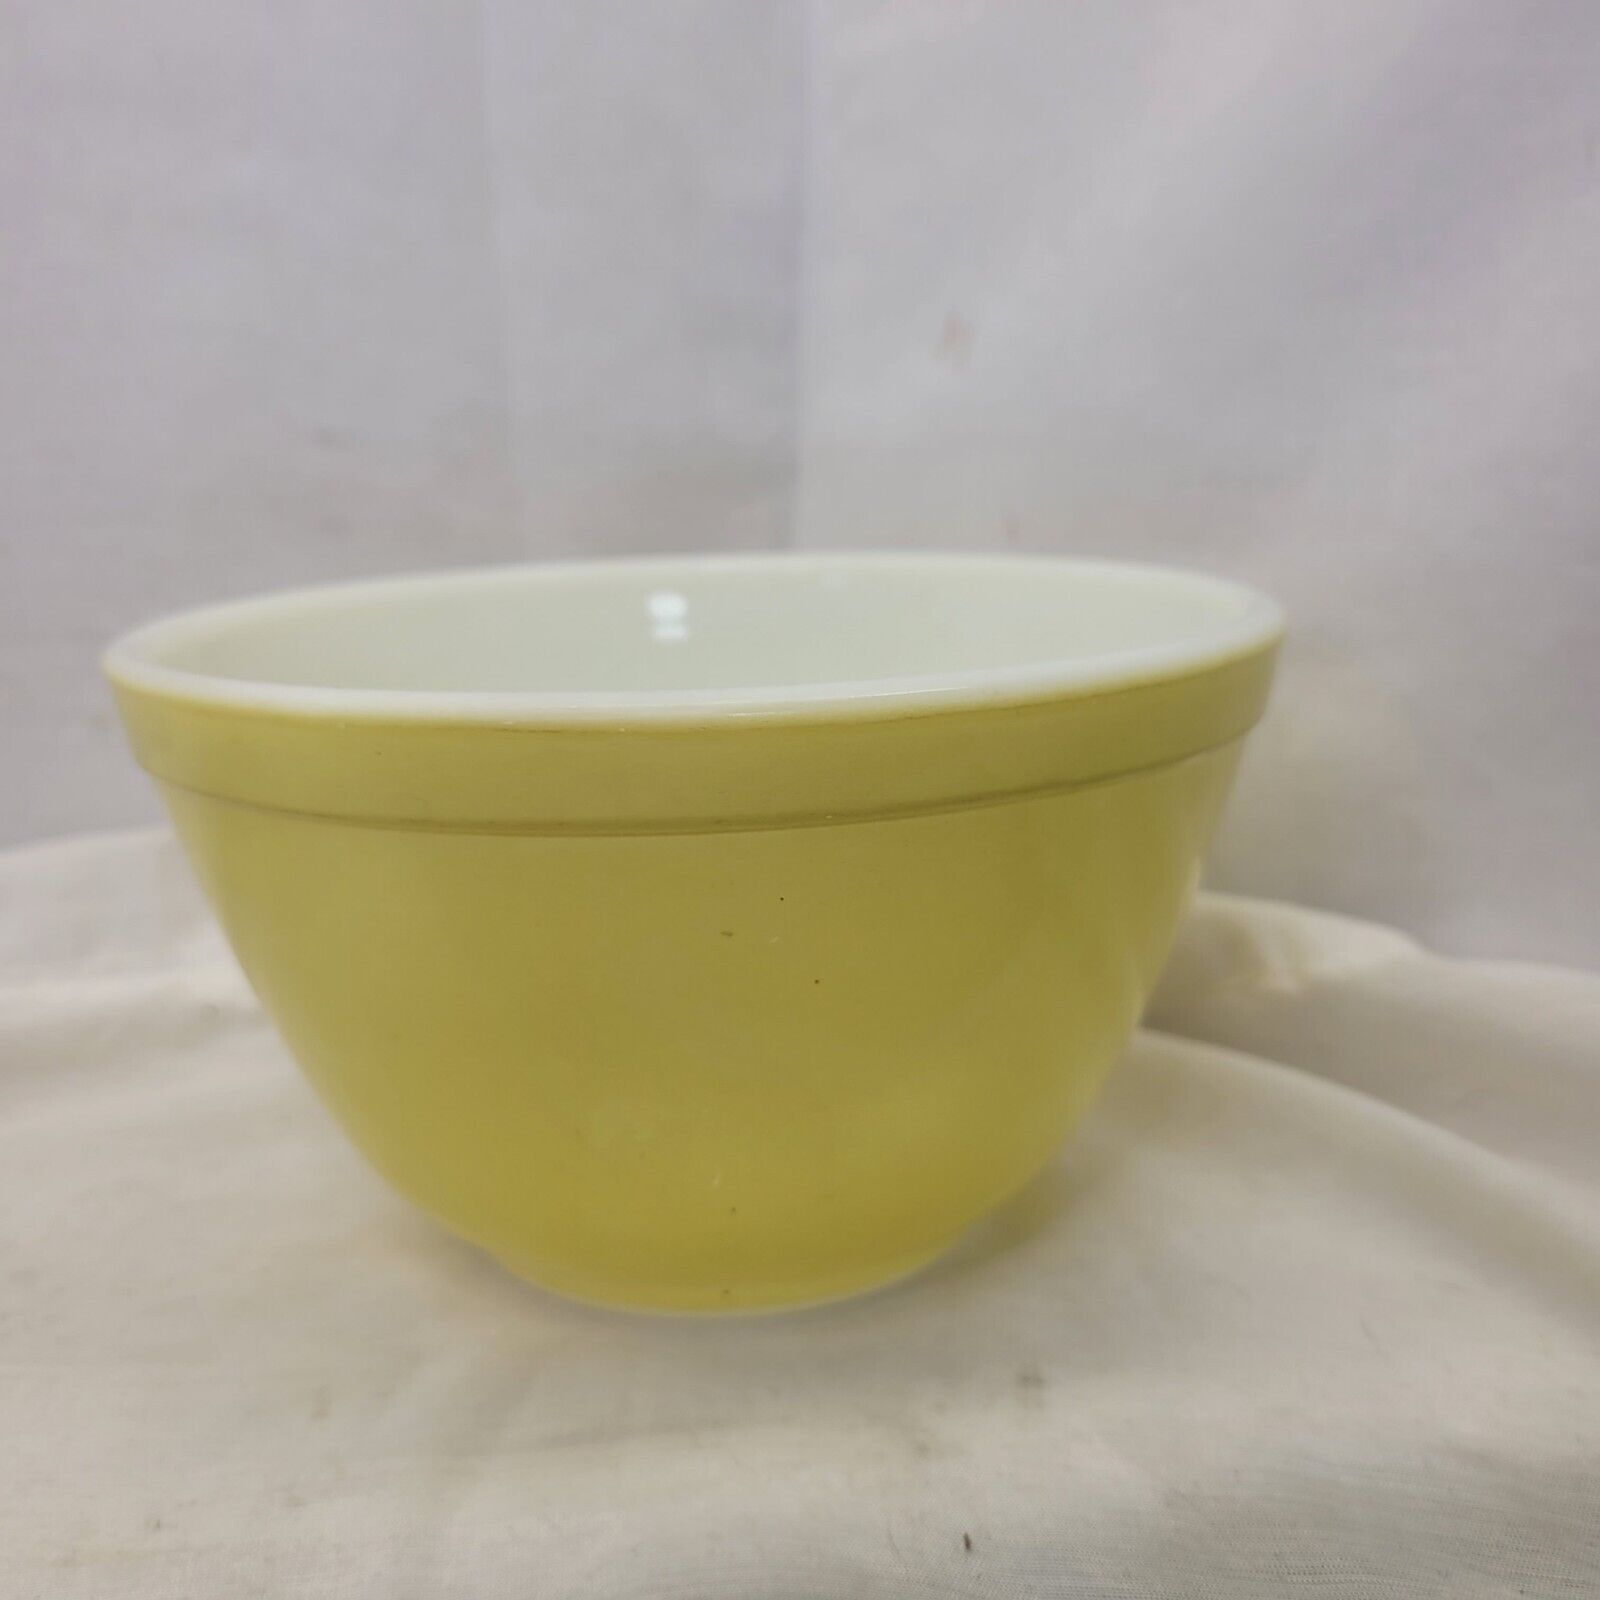 Vintage PYREX Primary Yellow #401 Small Nesting Mixing Bowl 1.5 pt Oven Ware